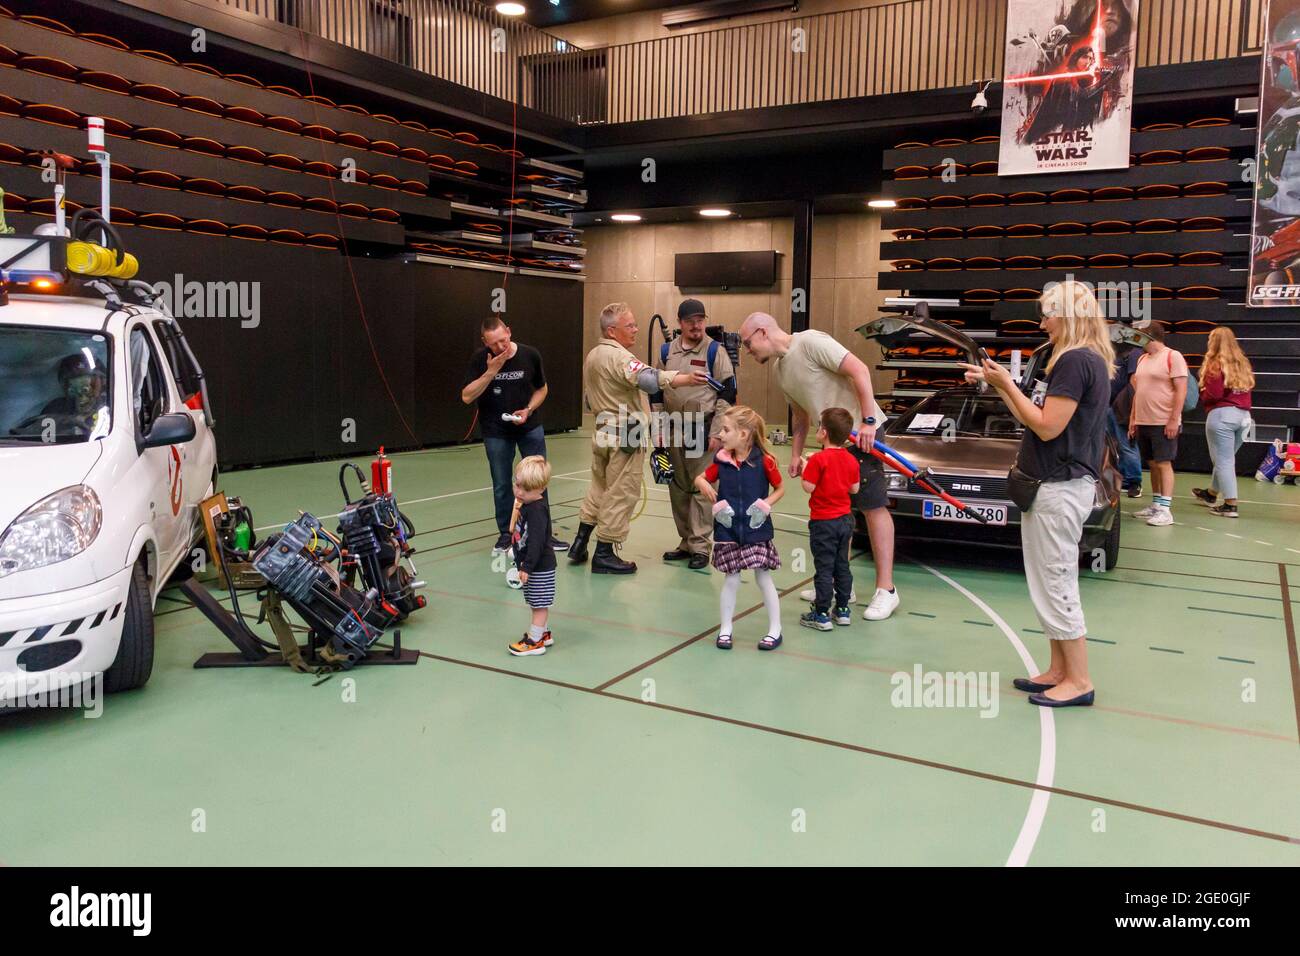 Randers, Denmark - 15 August 2021: A day in the galaxy, Large event in Randers Arena. Ghostbusters and ghostbusters car Stock Photo